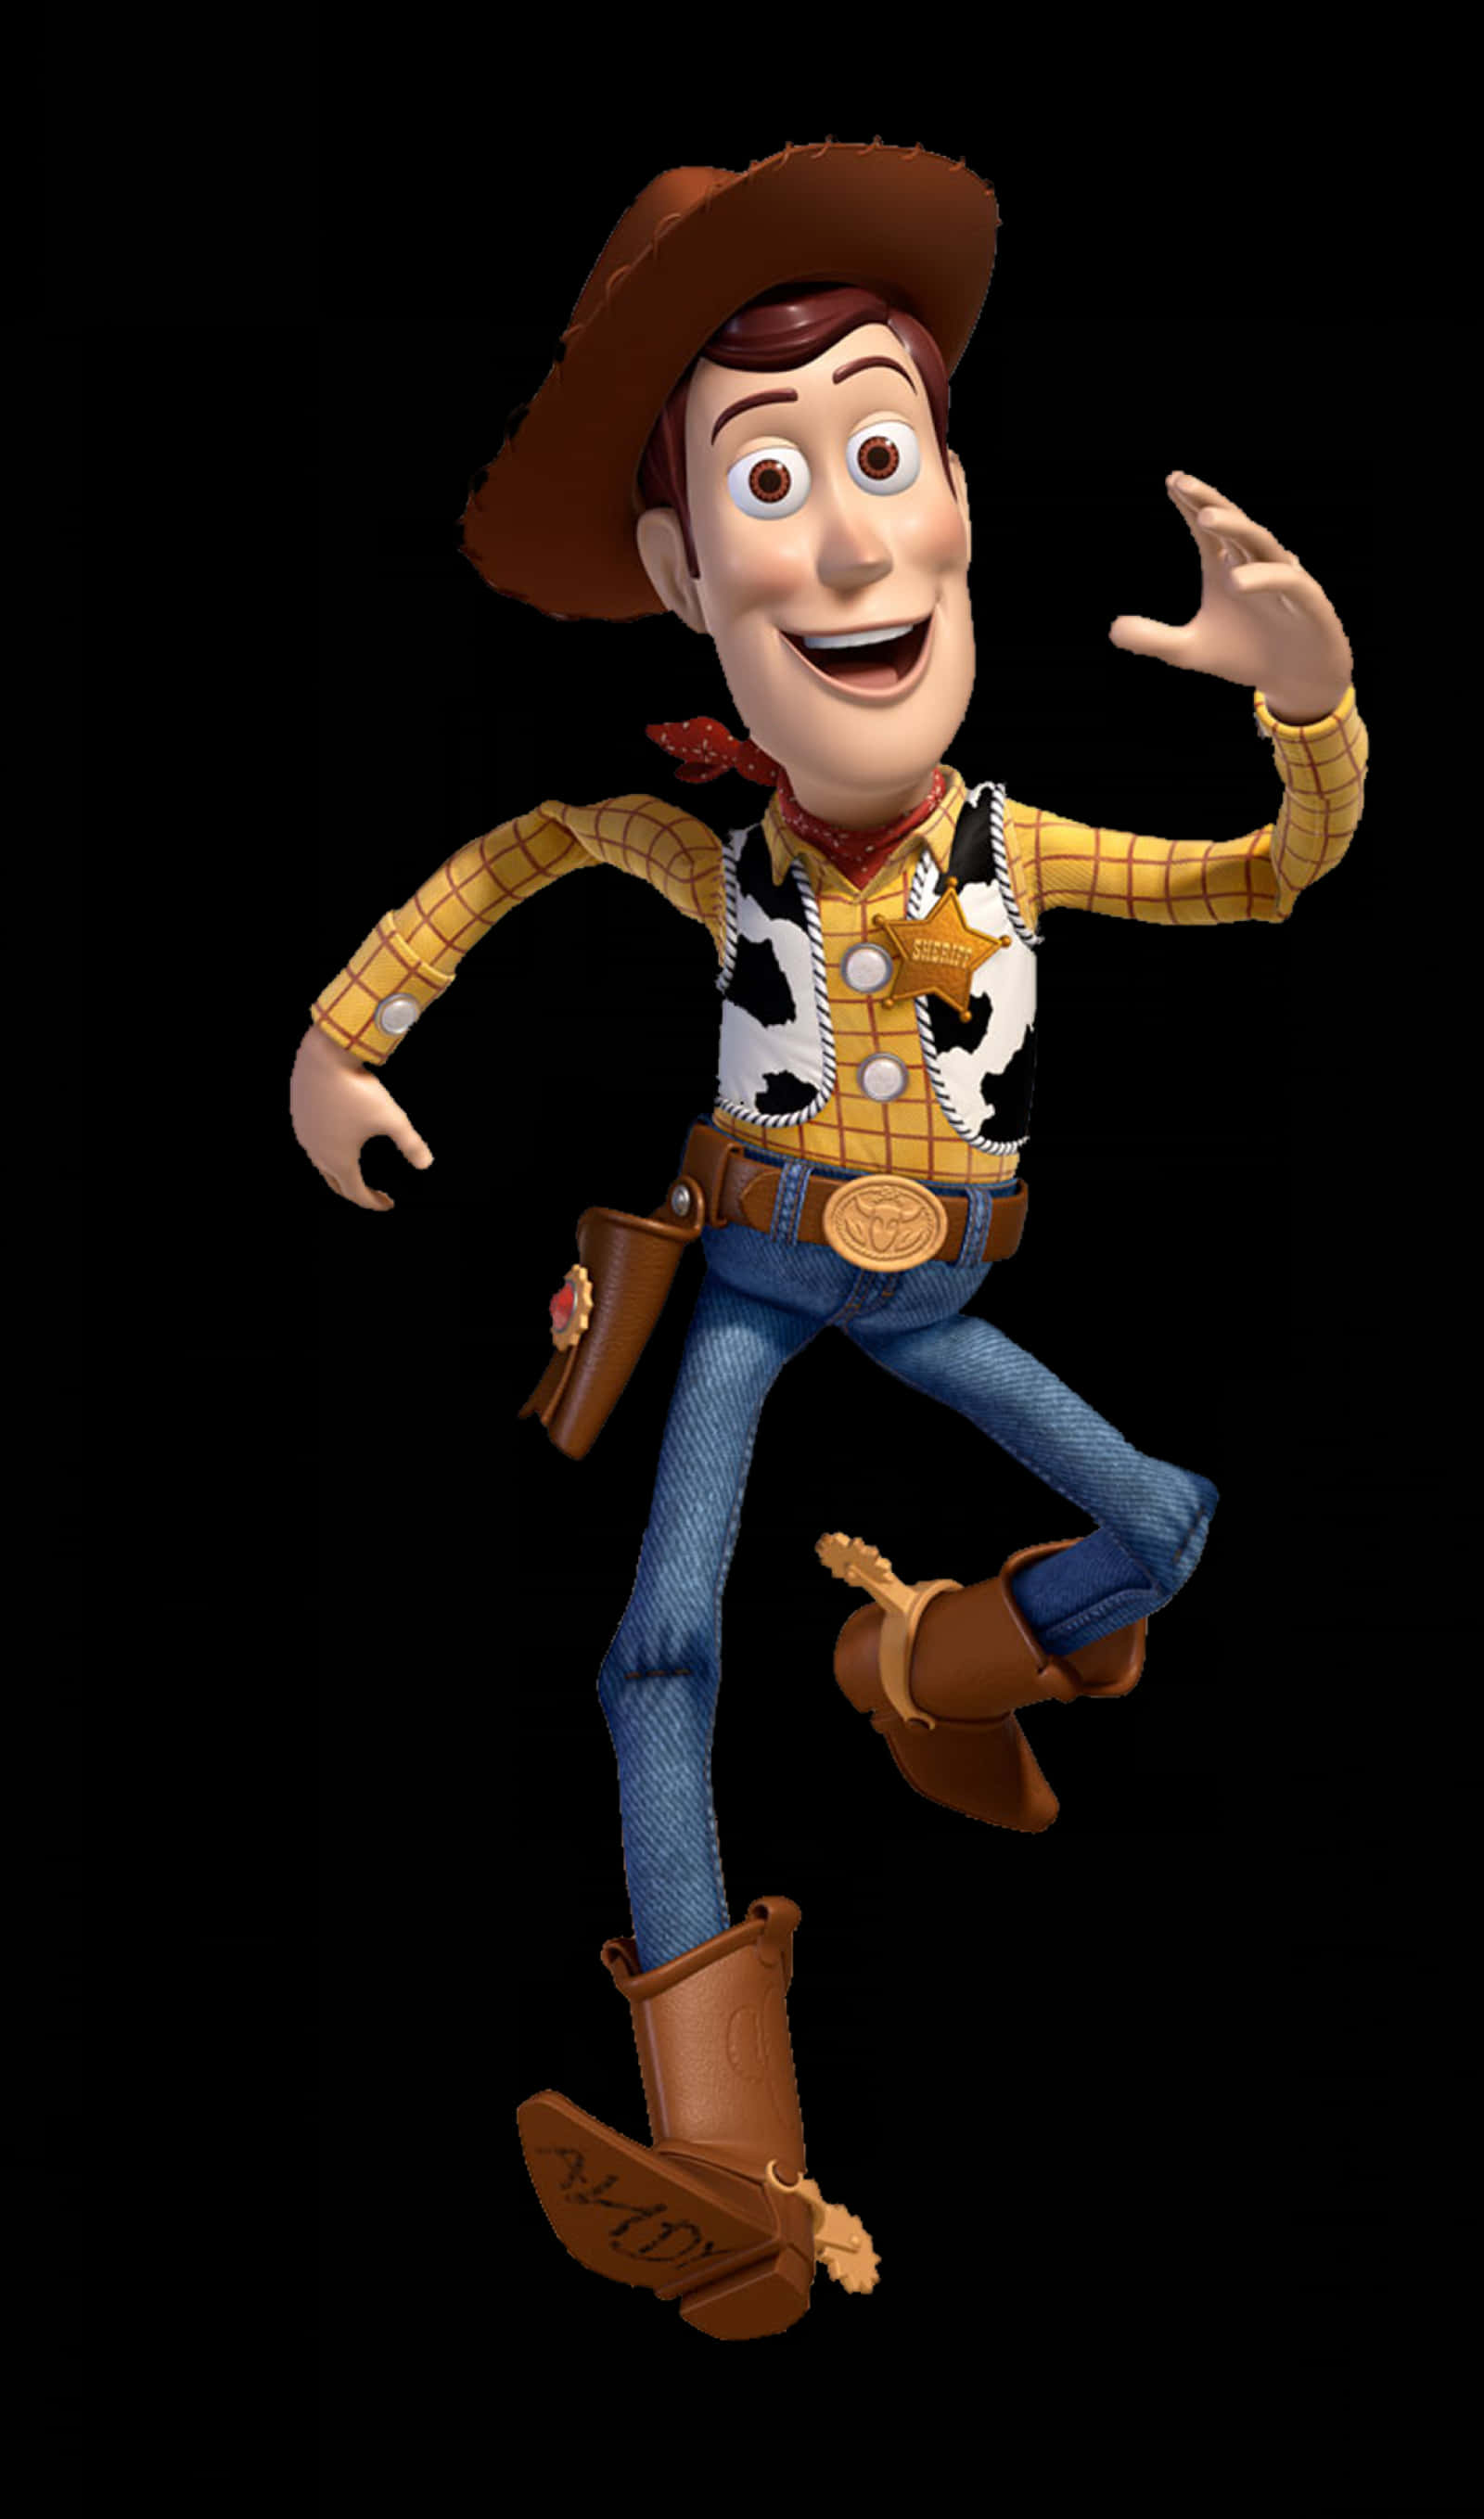 Download Toy Story Wallpaper PNG